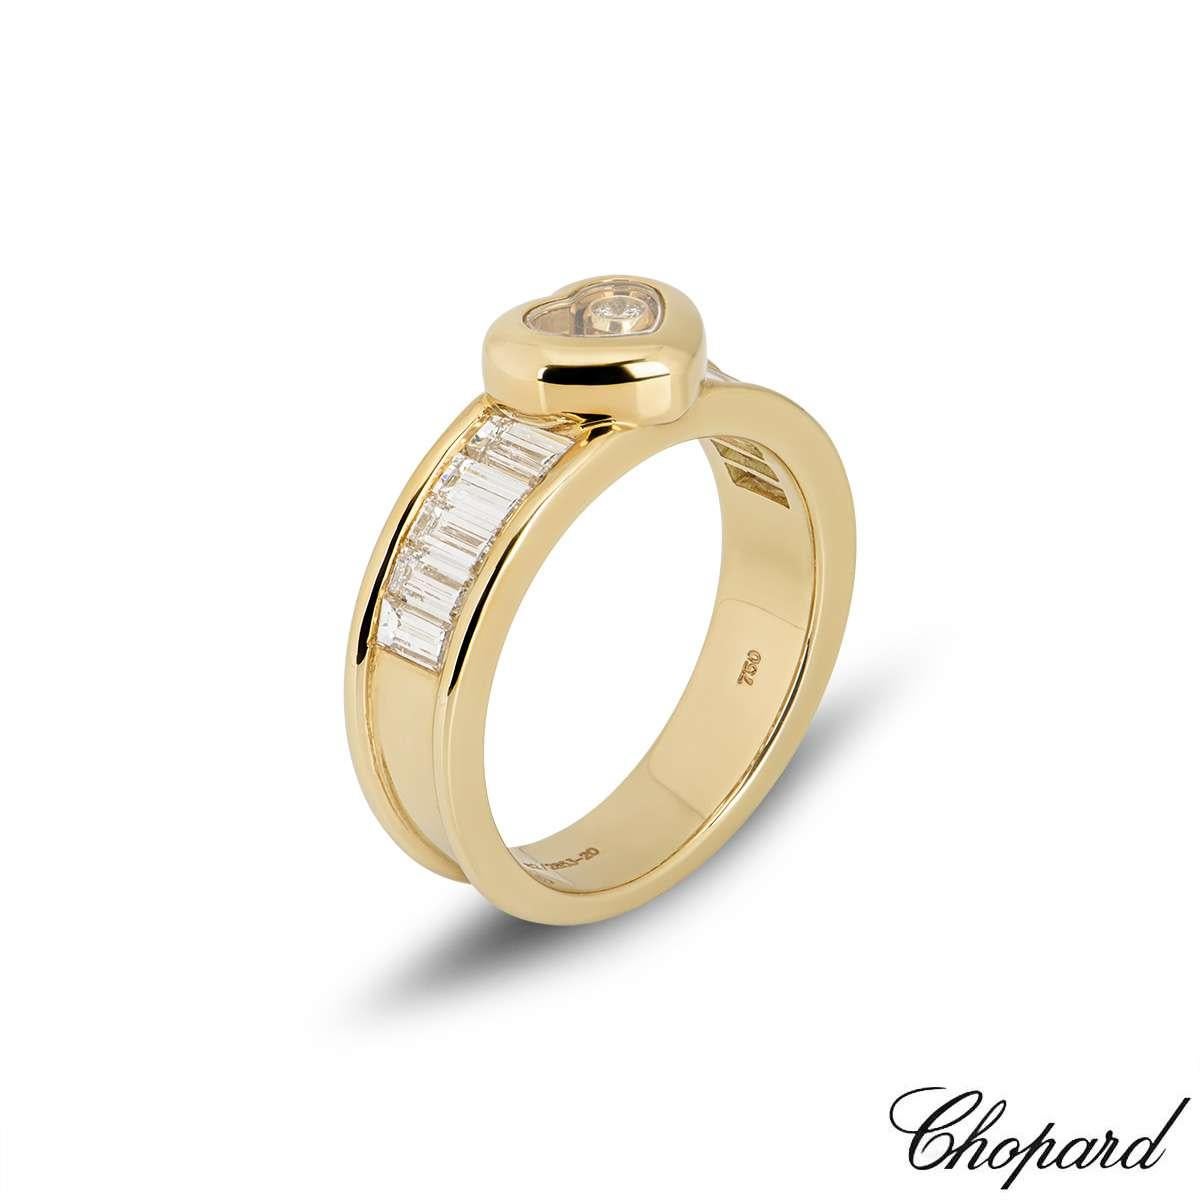 An 18k yellow gold ring from the Chopard Happy Diamond collection. The ring is set to the centre with a heart motif, made up of the iconic Chopard signed glass, encasing a 0.05ct single floating diamond. Complementing the motif are trapezium cut